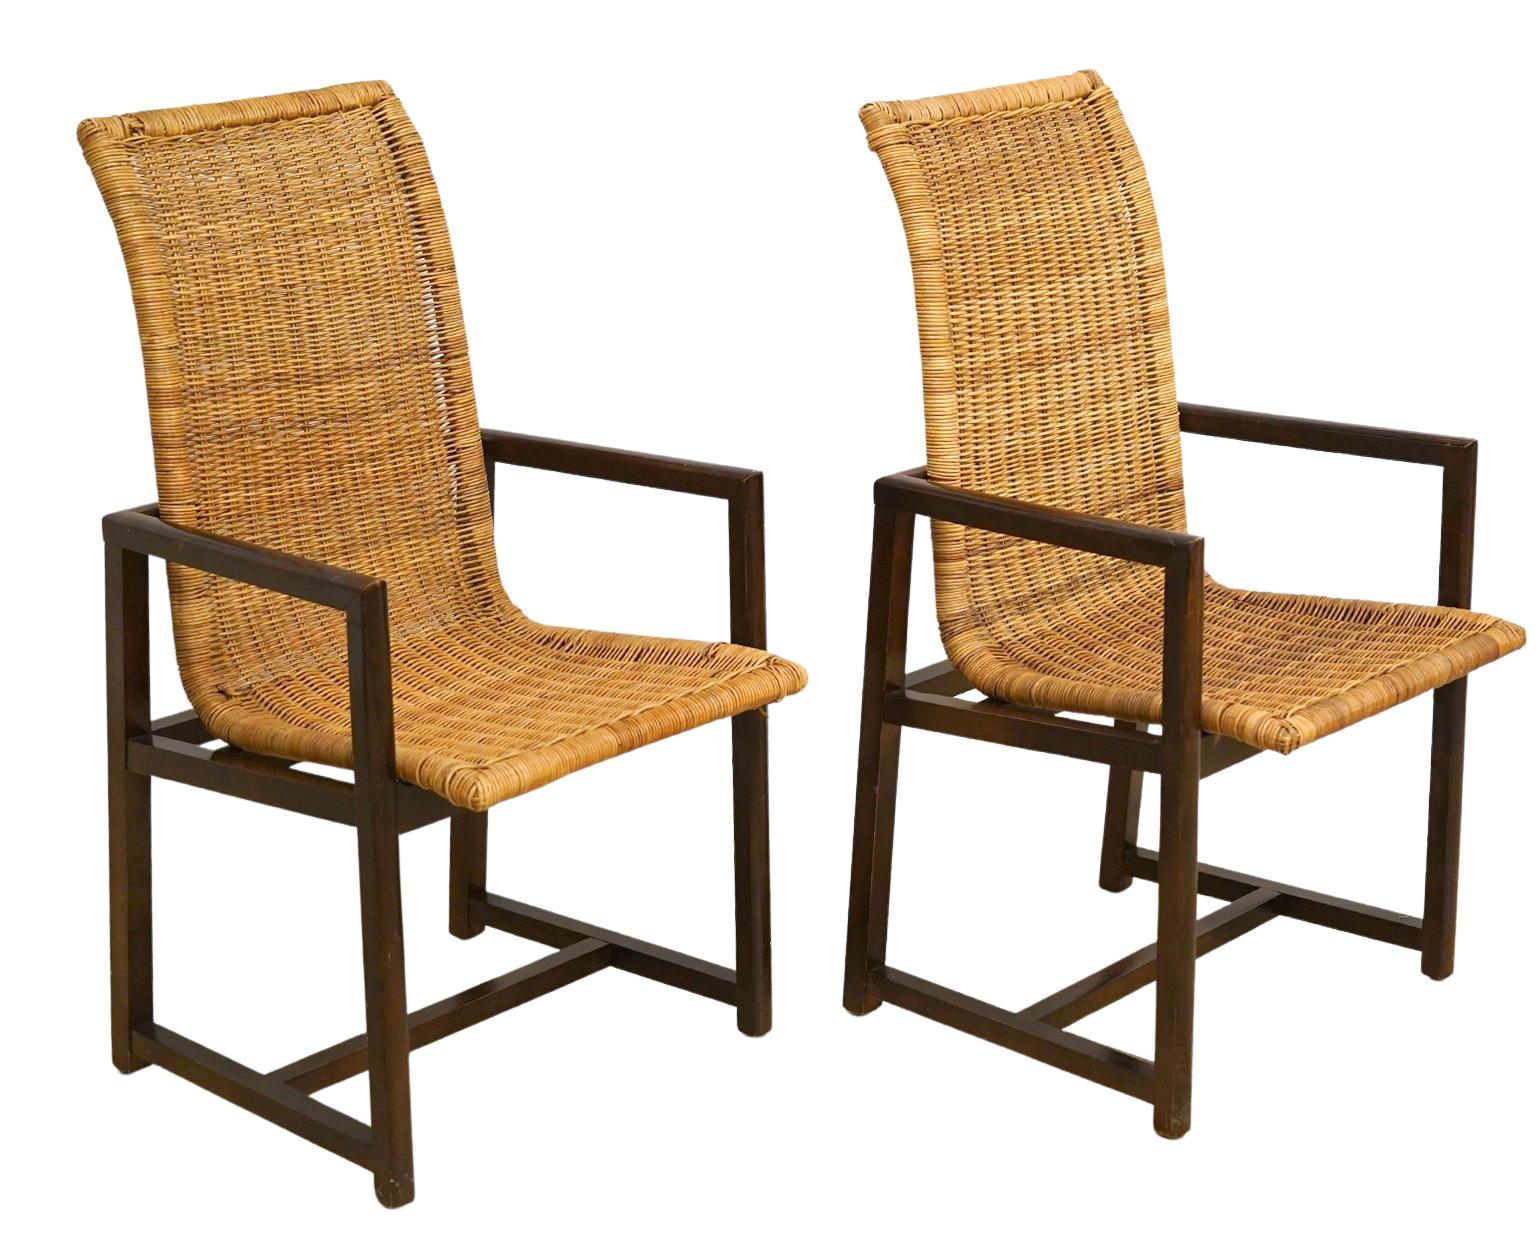 Wonderful Set of 10 High Back Woven Rattan and Beach Wood Dining Chairs 2